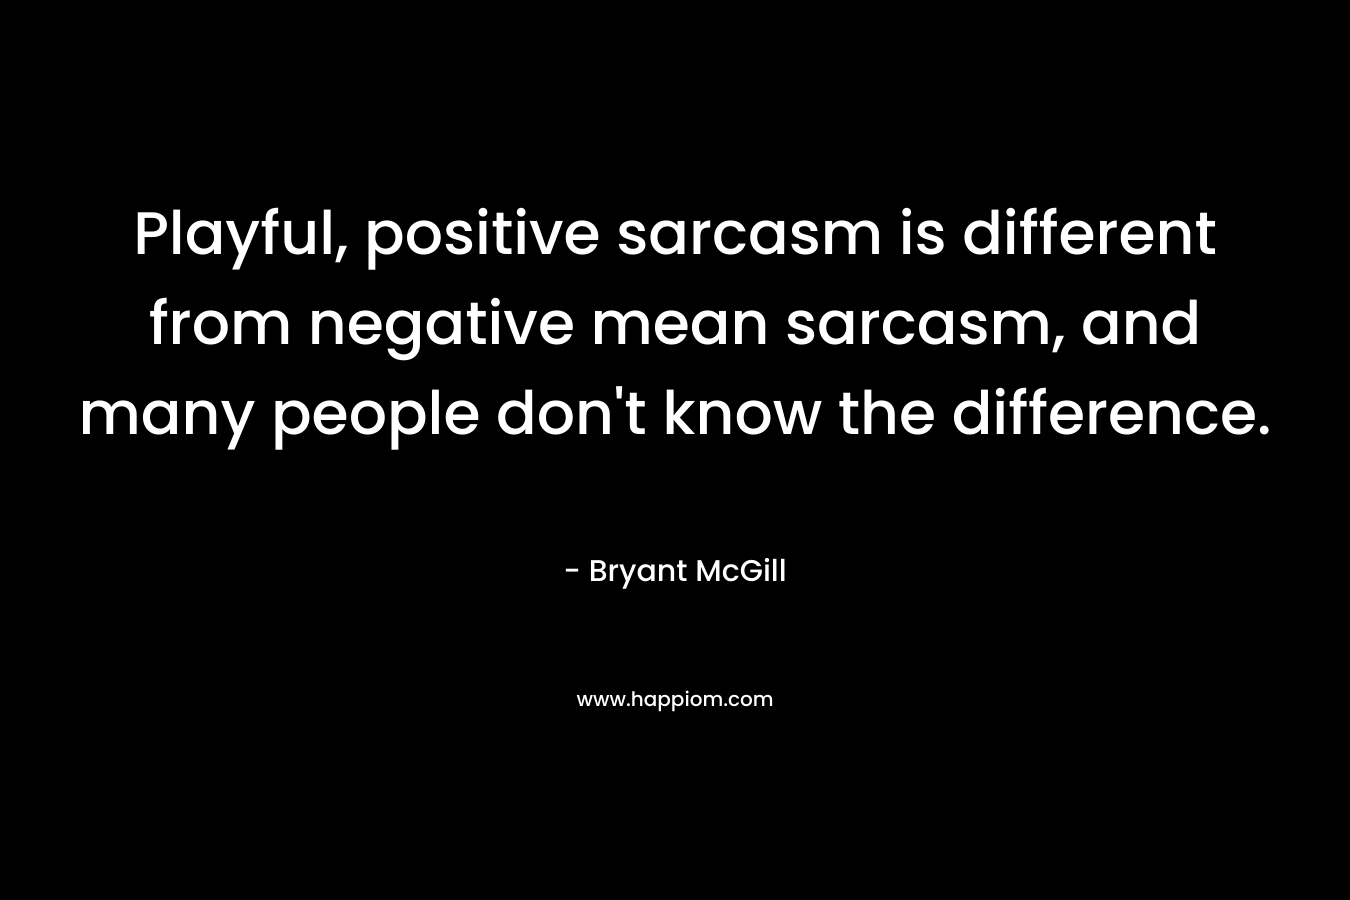 Playful, positive sarcasm is different from negative mean sarcasm, and many people don't know the difference.